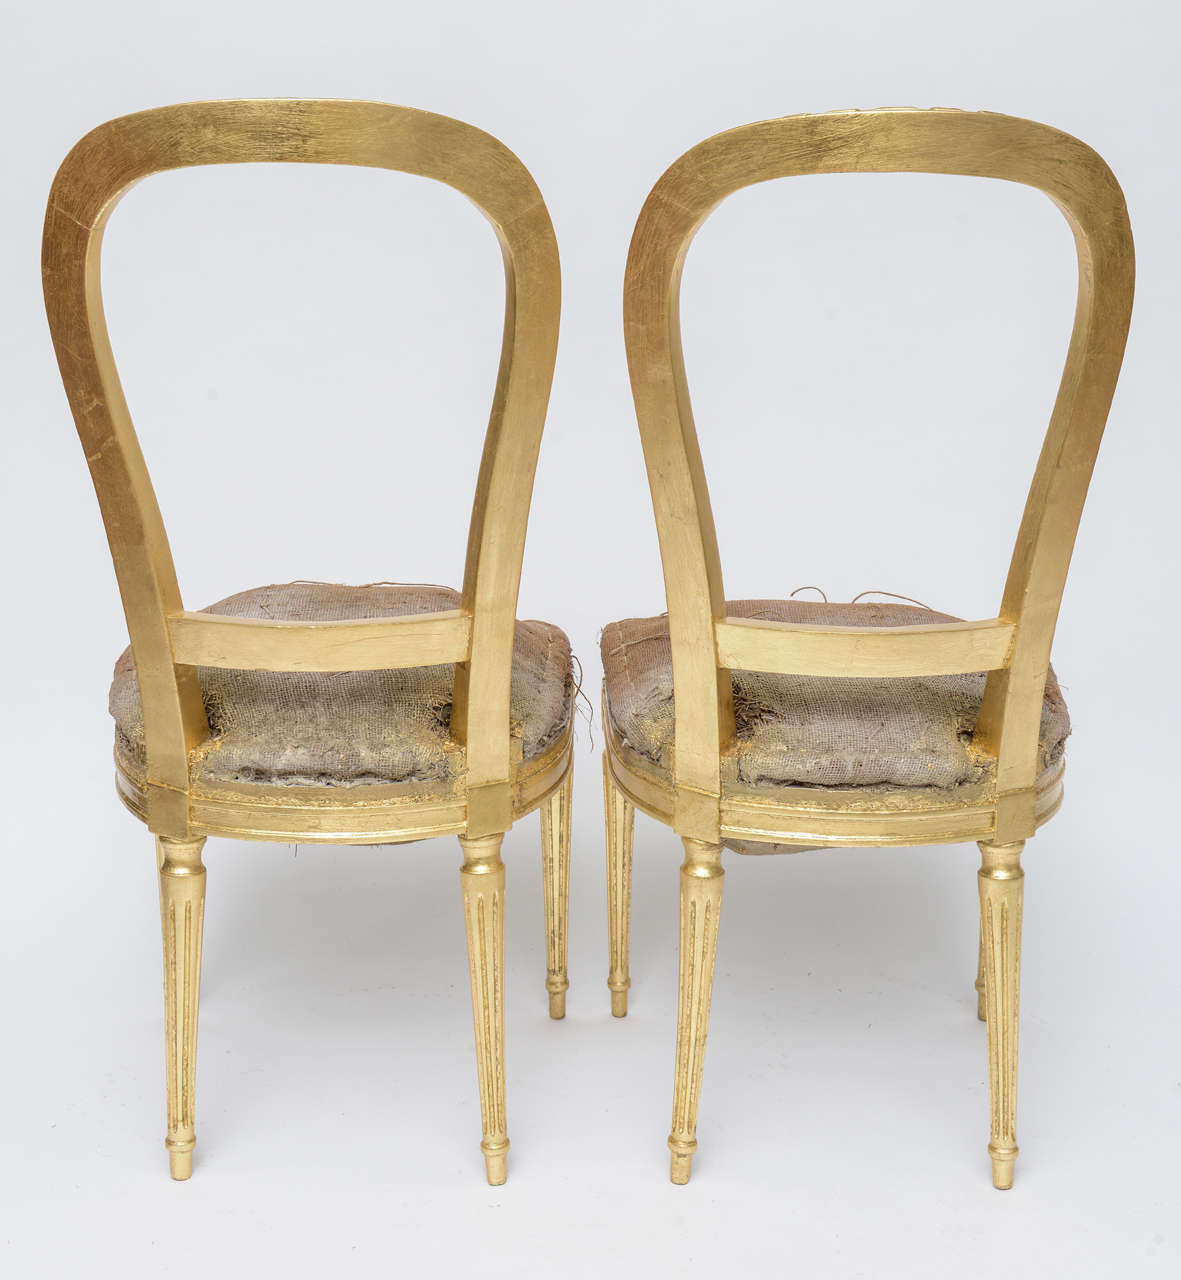 Giltwood Pair of Antique Louis XVI Style Gilded Unfinished Chairs